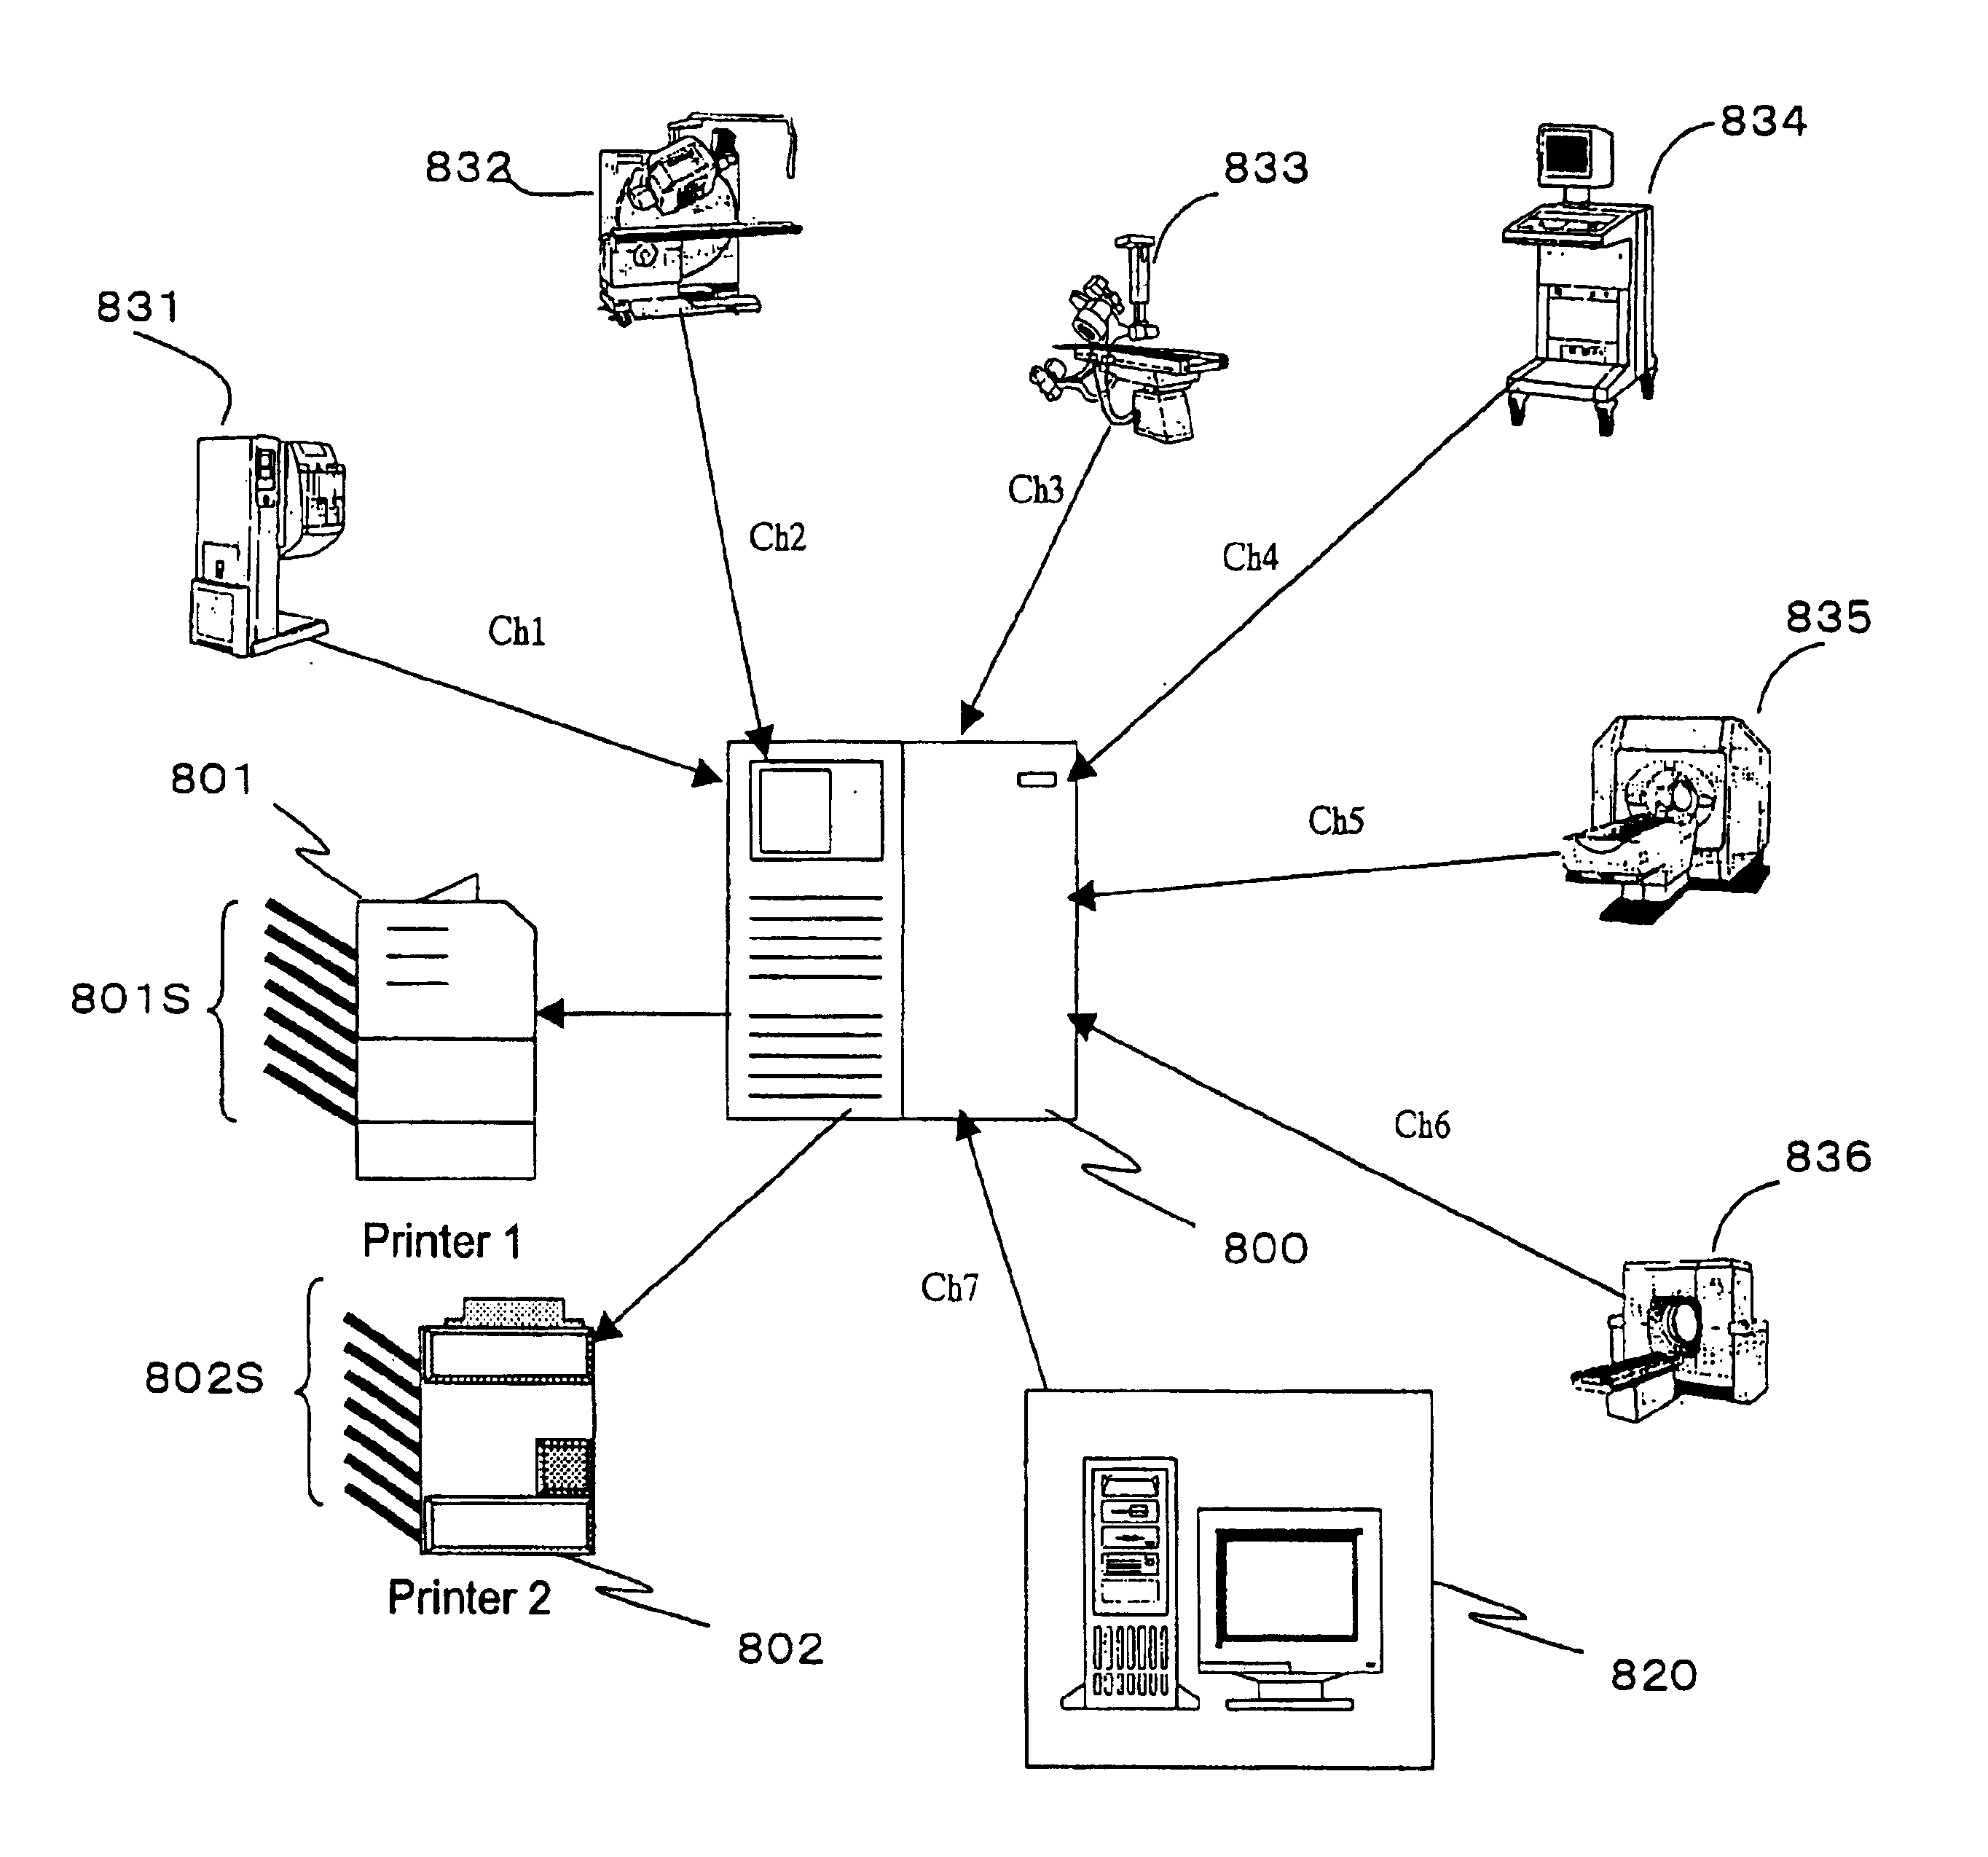 Method and apparatus for processing image output